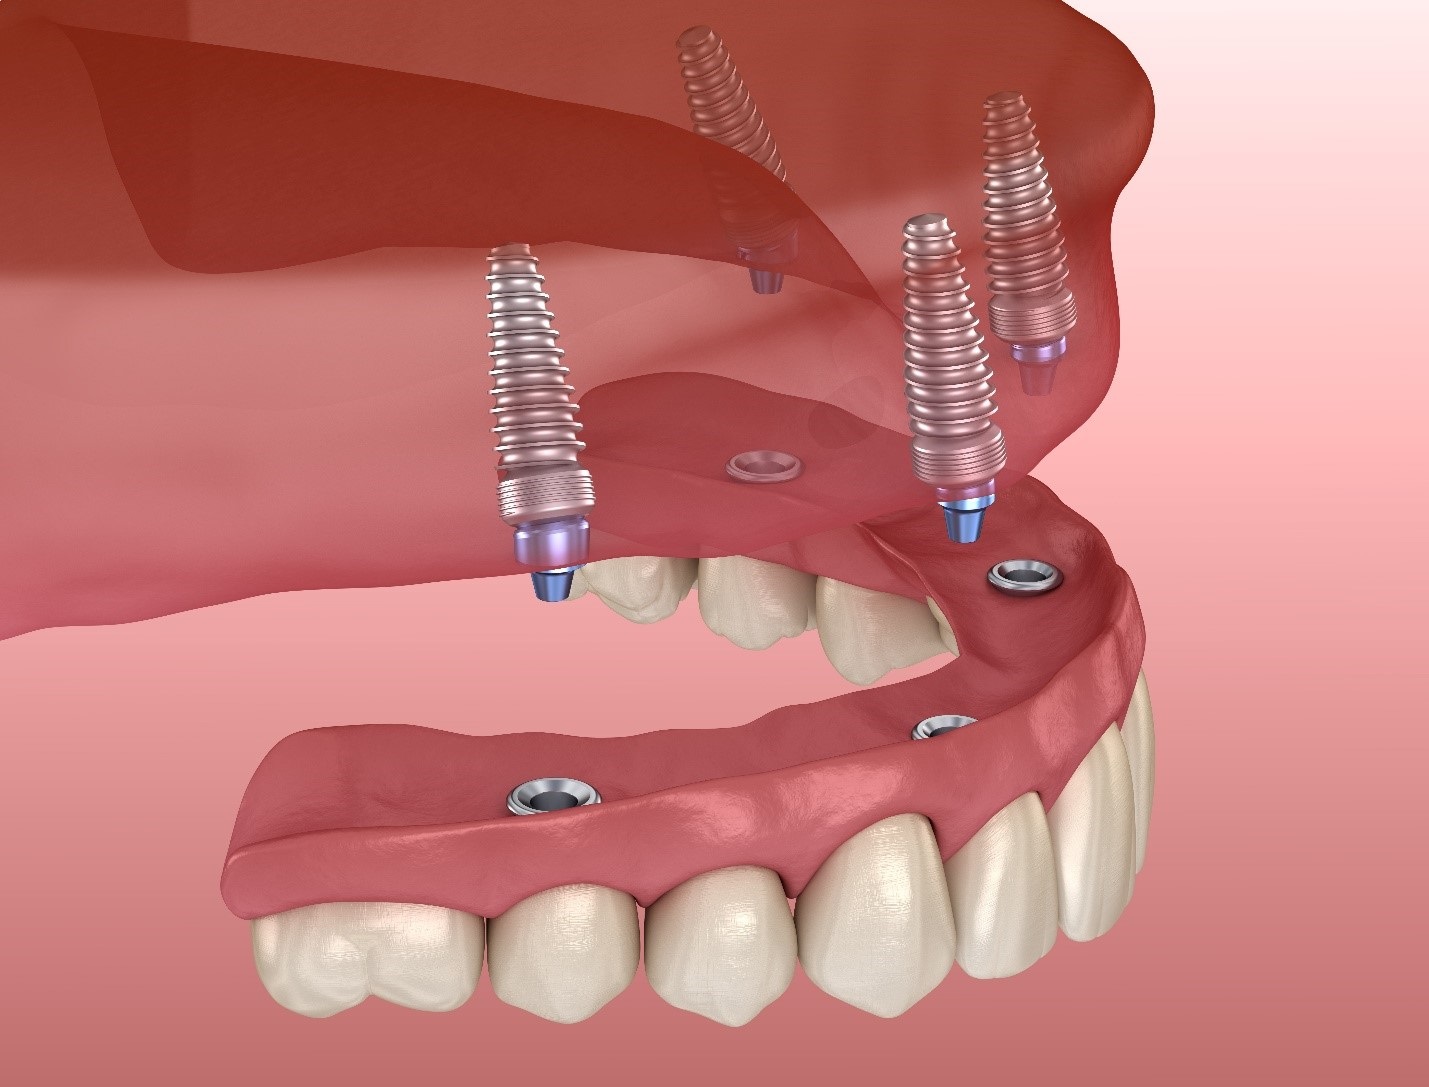 Seven common questions and answers about dental implants